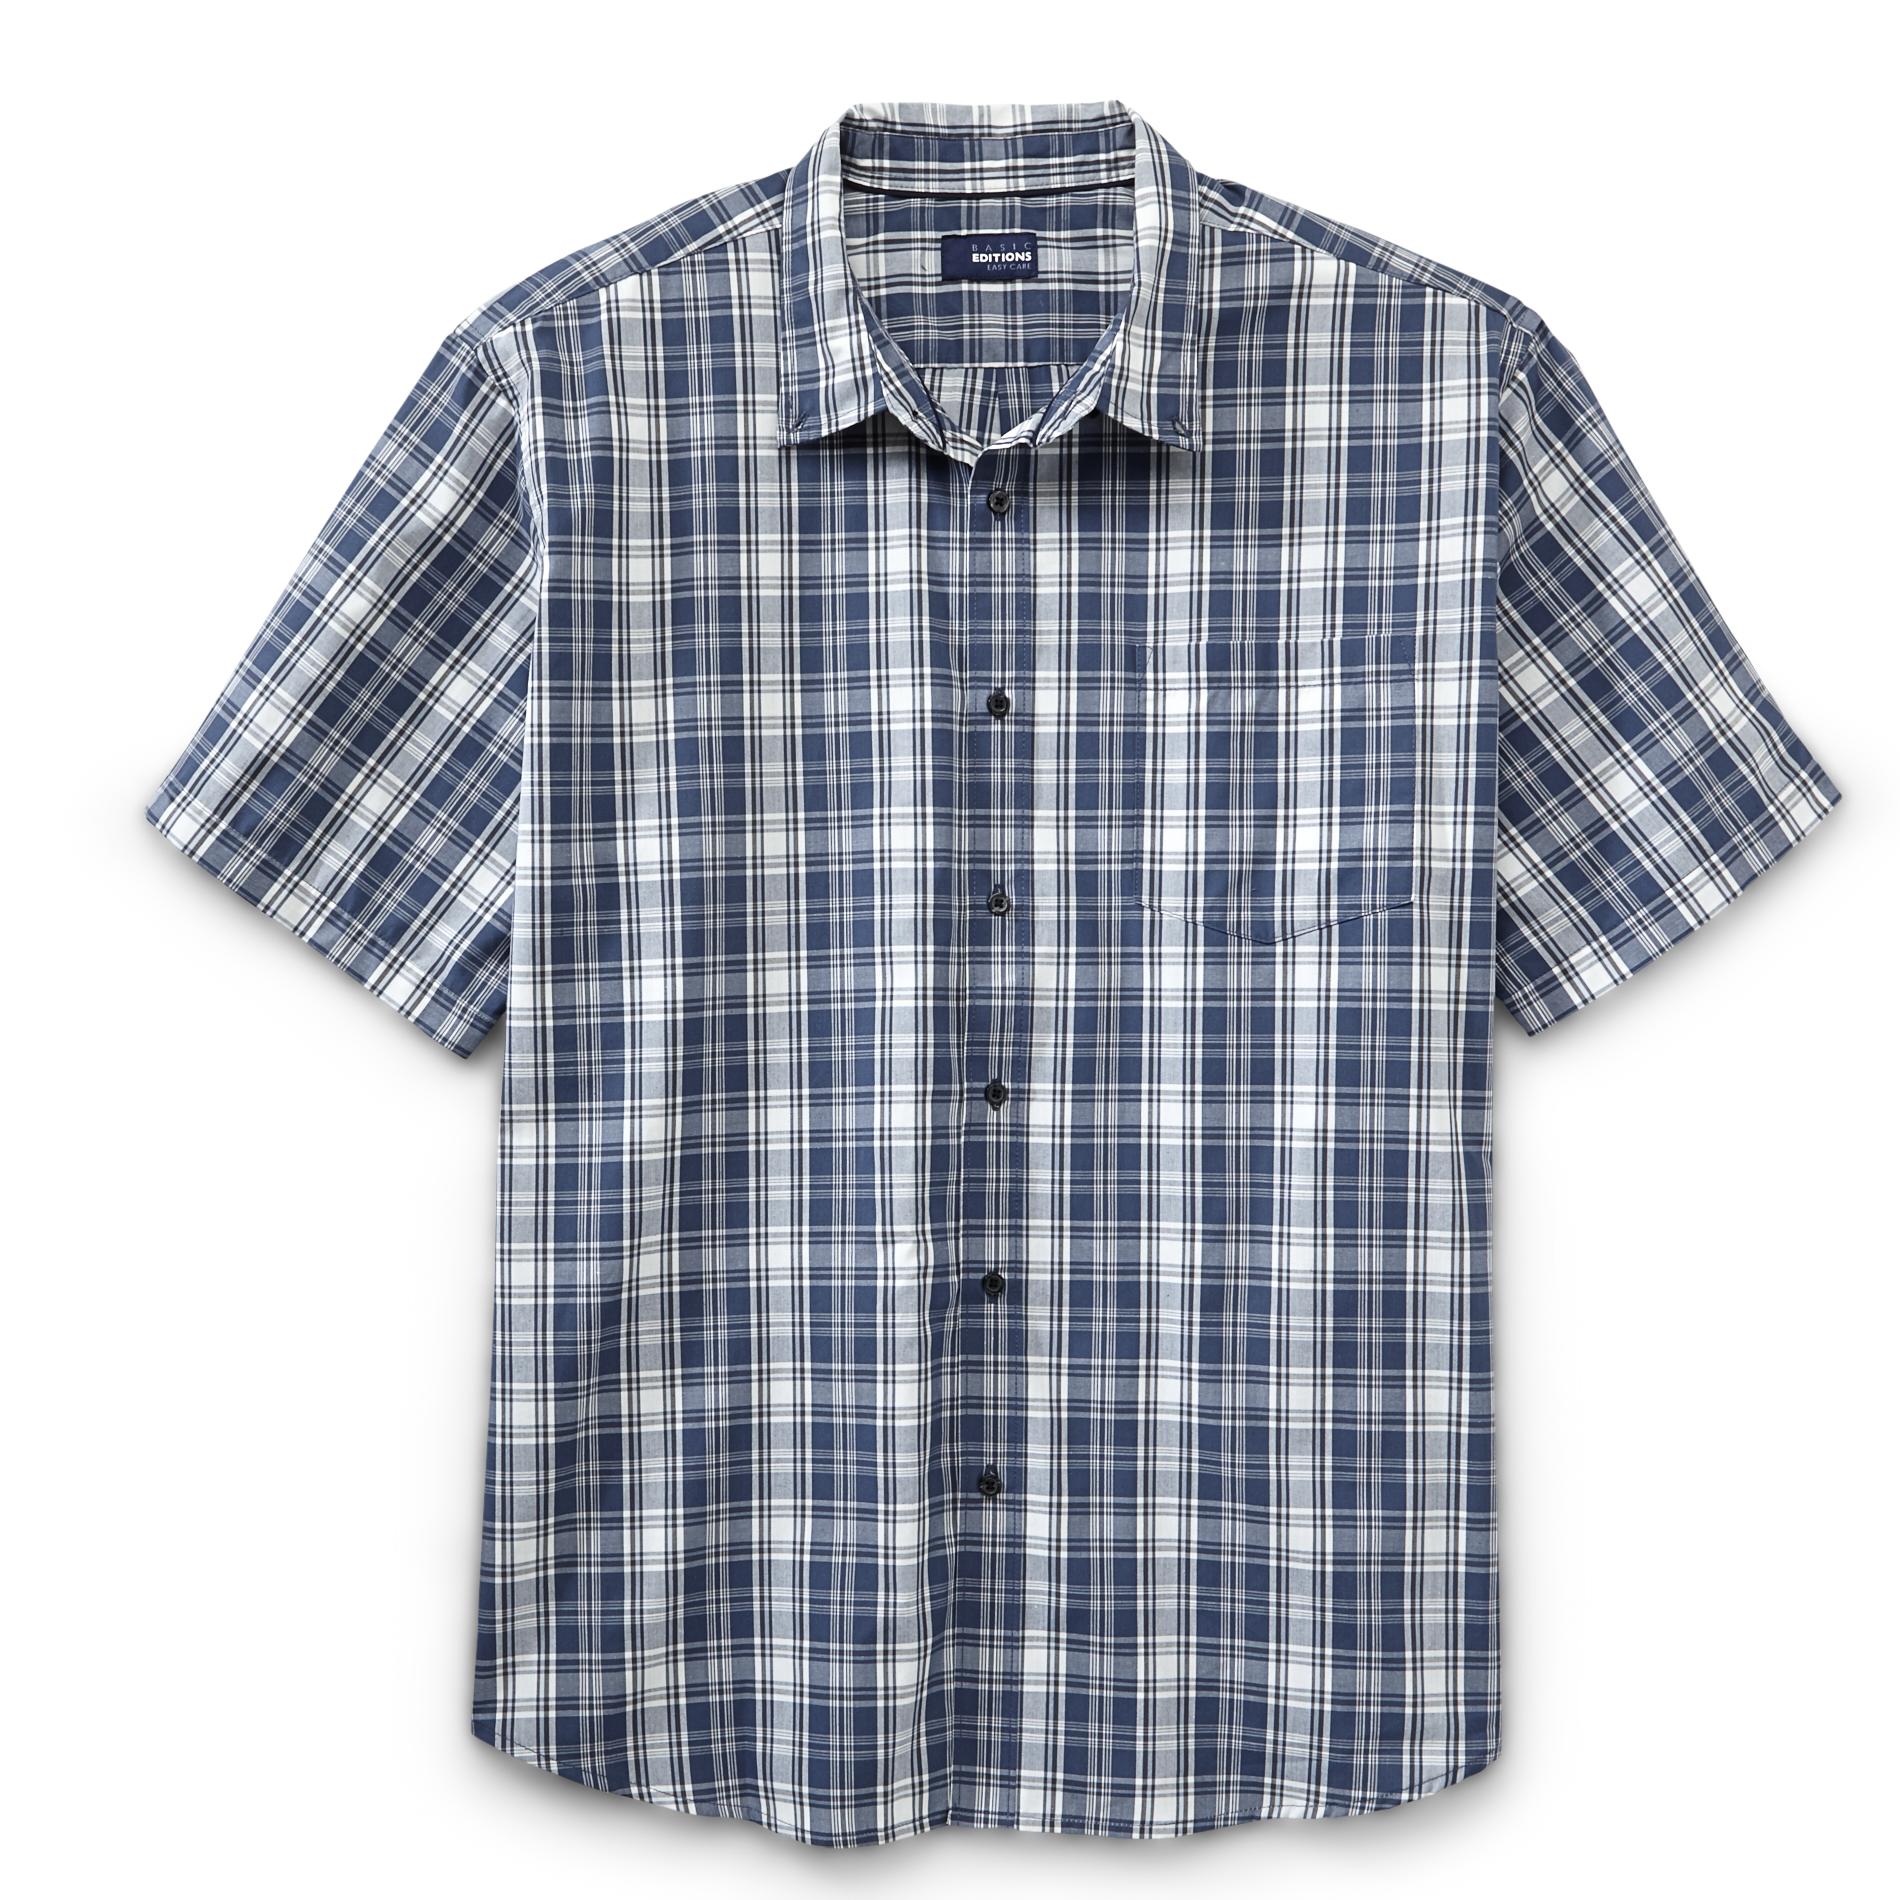 Basic Editions Men's Big & Tall Easy Care Woven Shirt - Grid Pattern